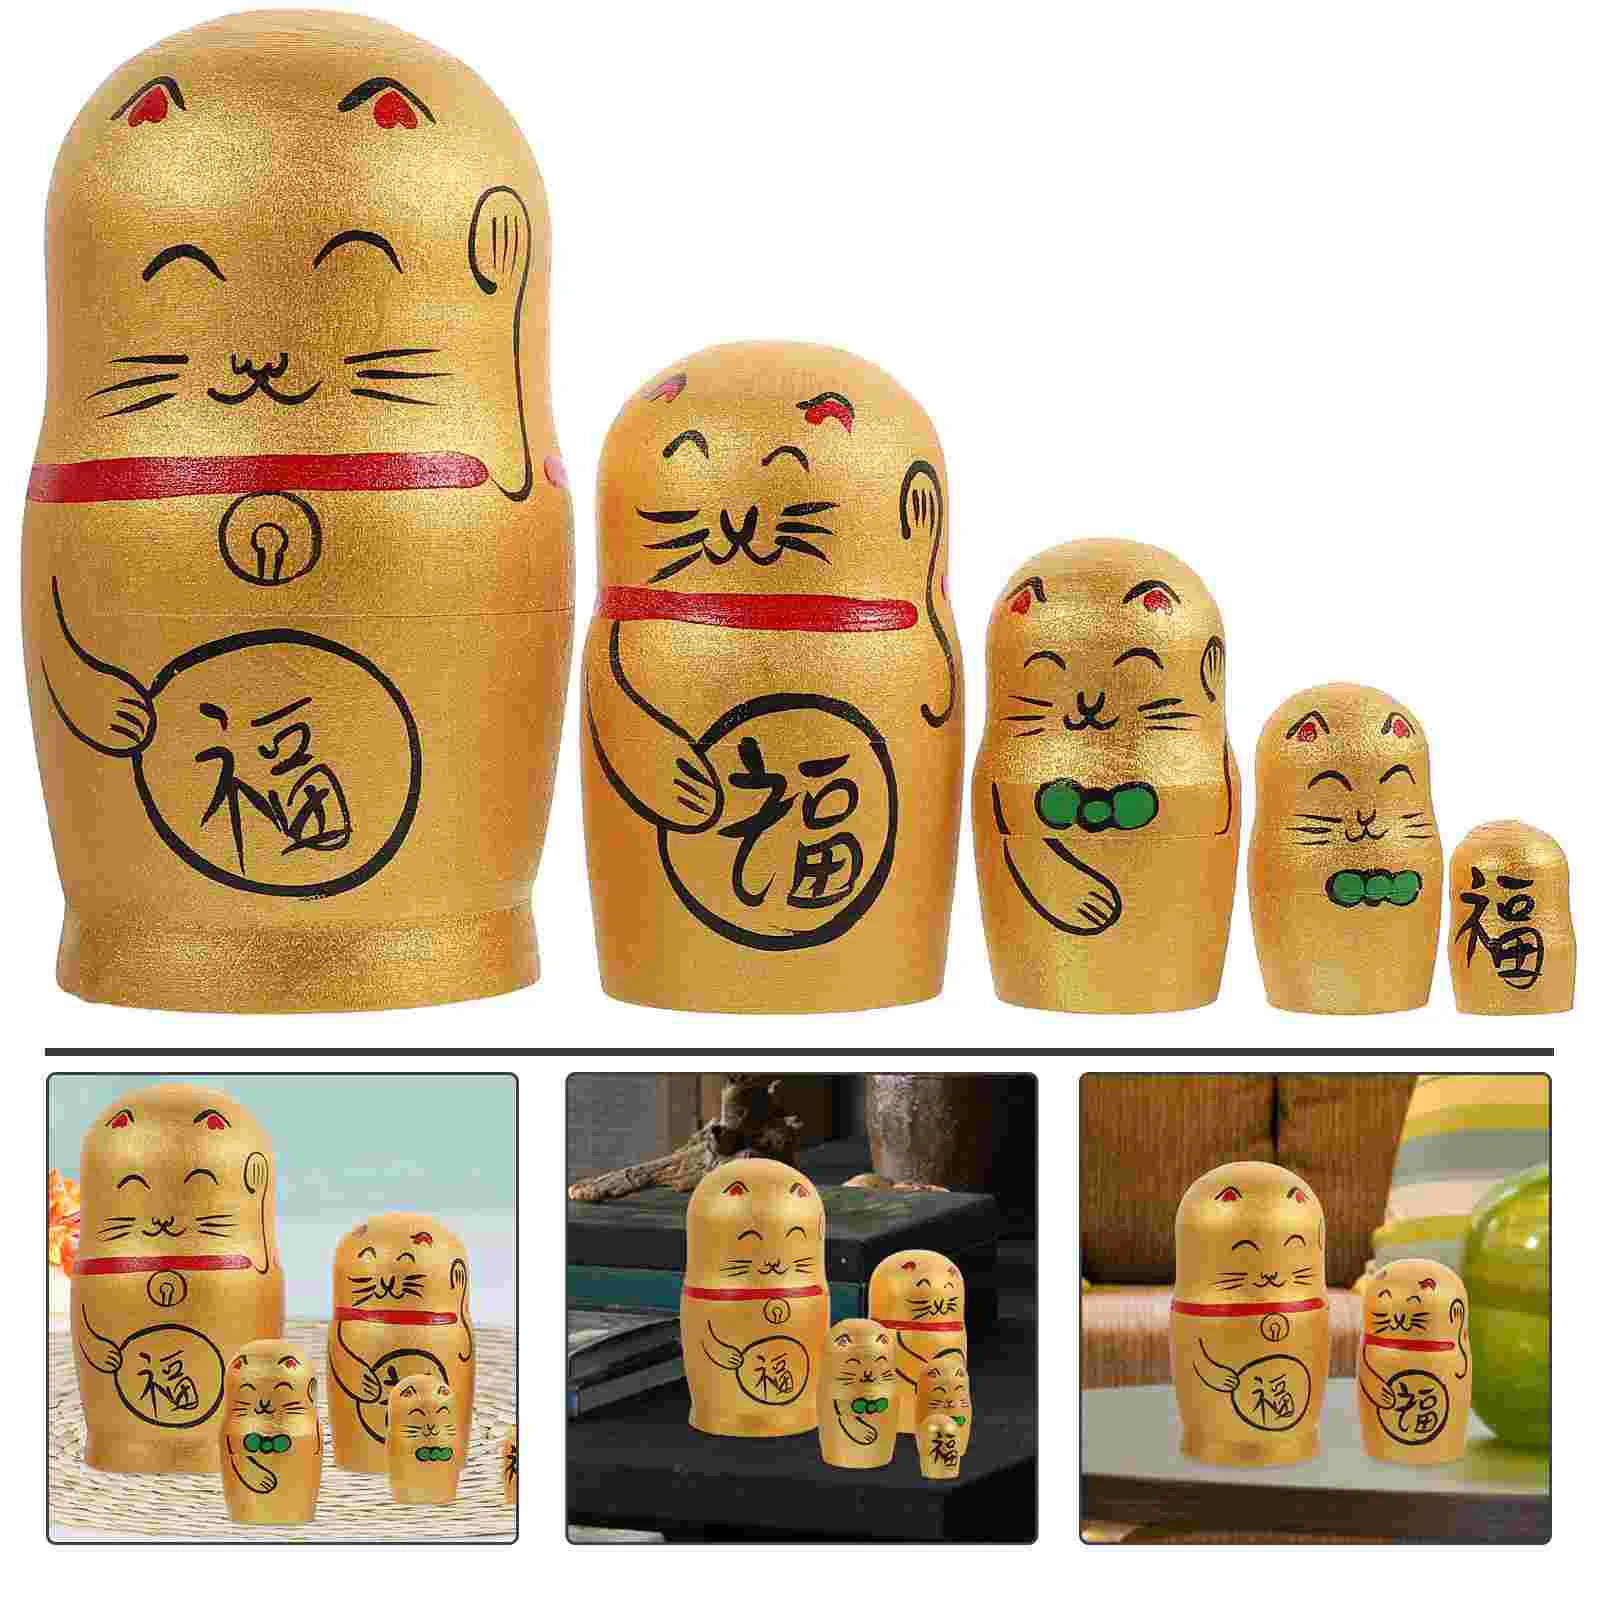 

Nesting Toys Russian Dolls Stackable Craft Decorative Stacking Bookshelf Ornaments Lucky Cat